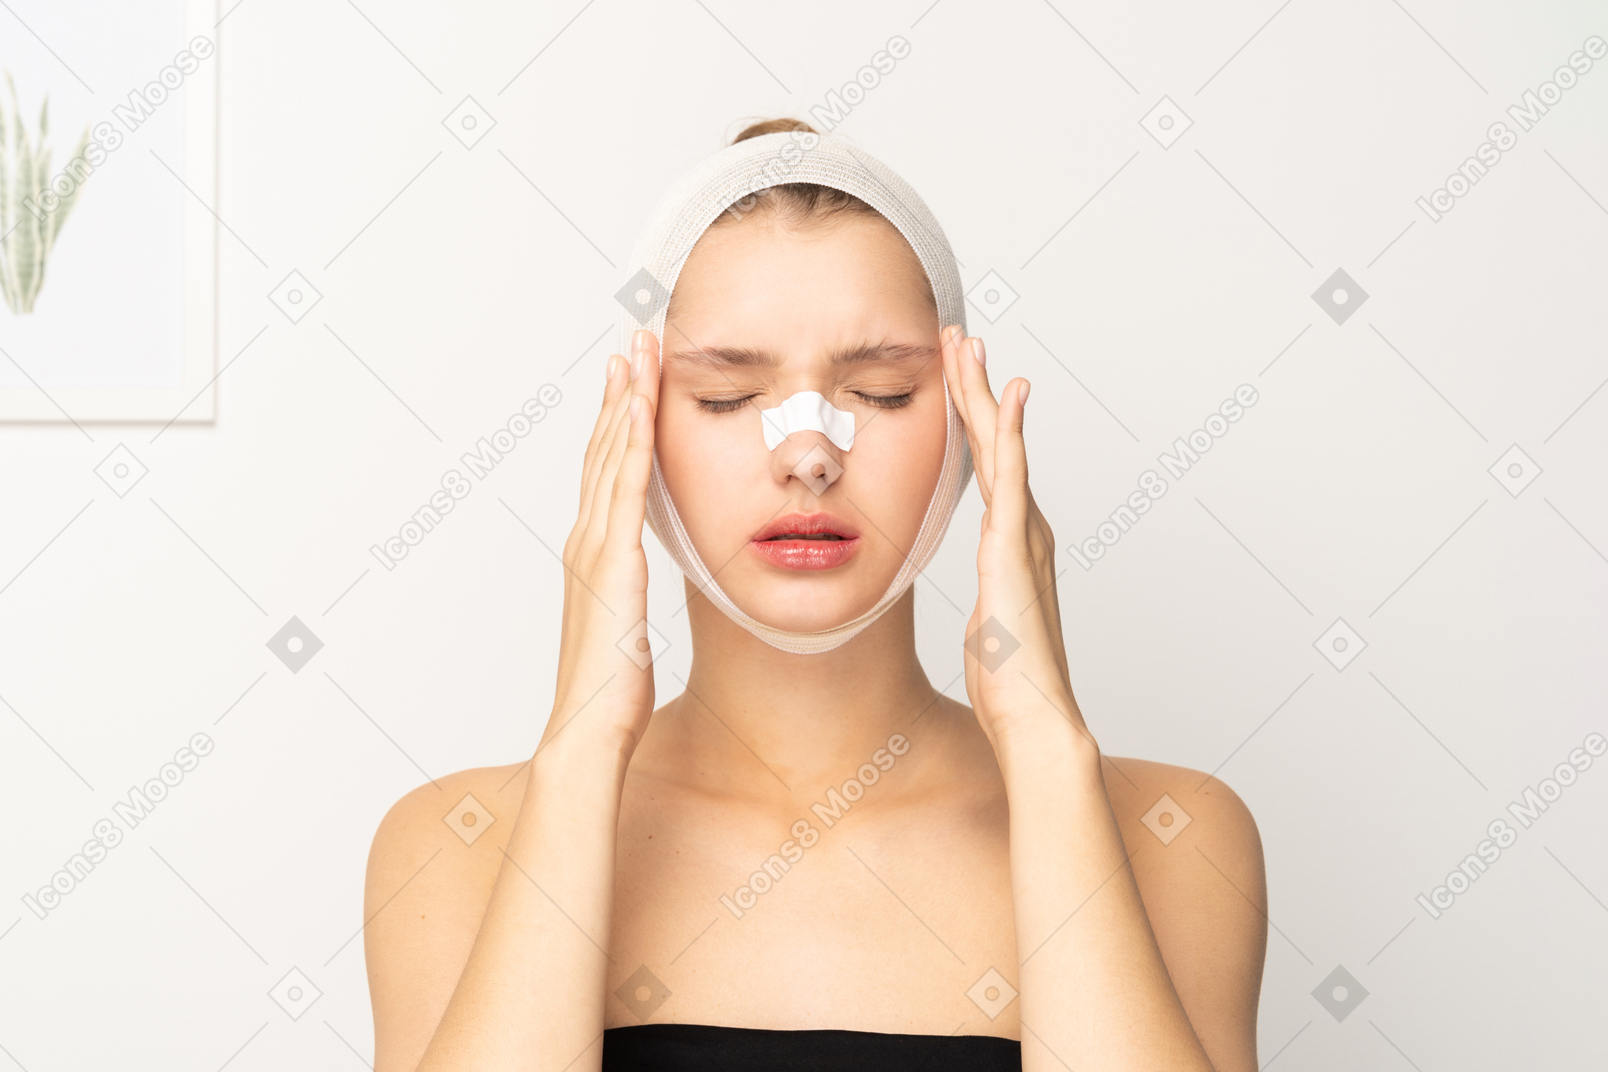 Young woman with bandaged head touching her temples